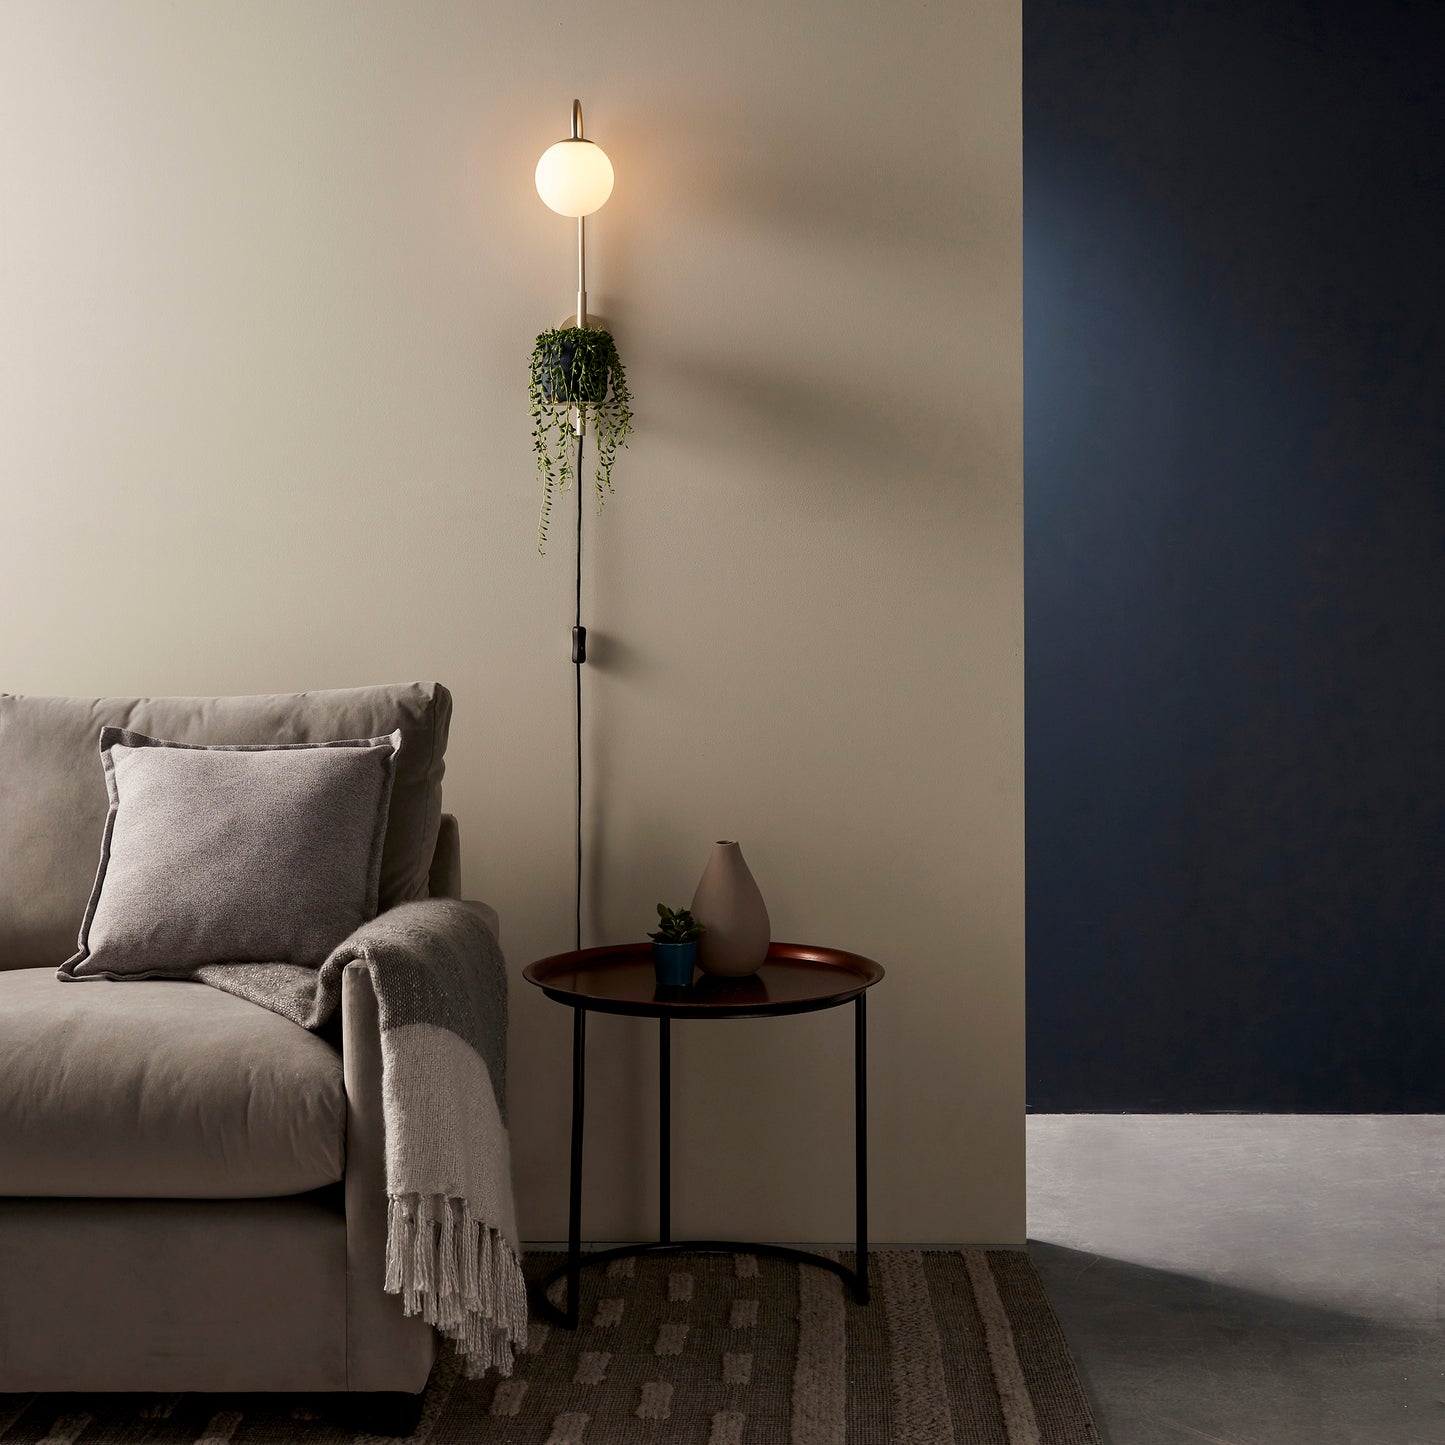 Guest Wall with Plug in Table Lamp